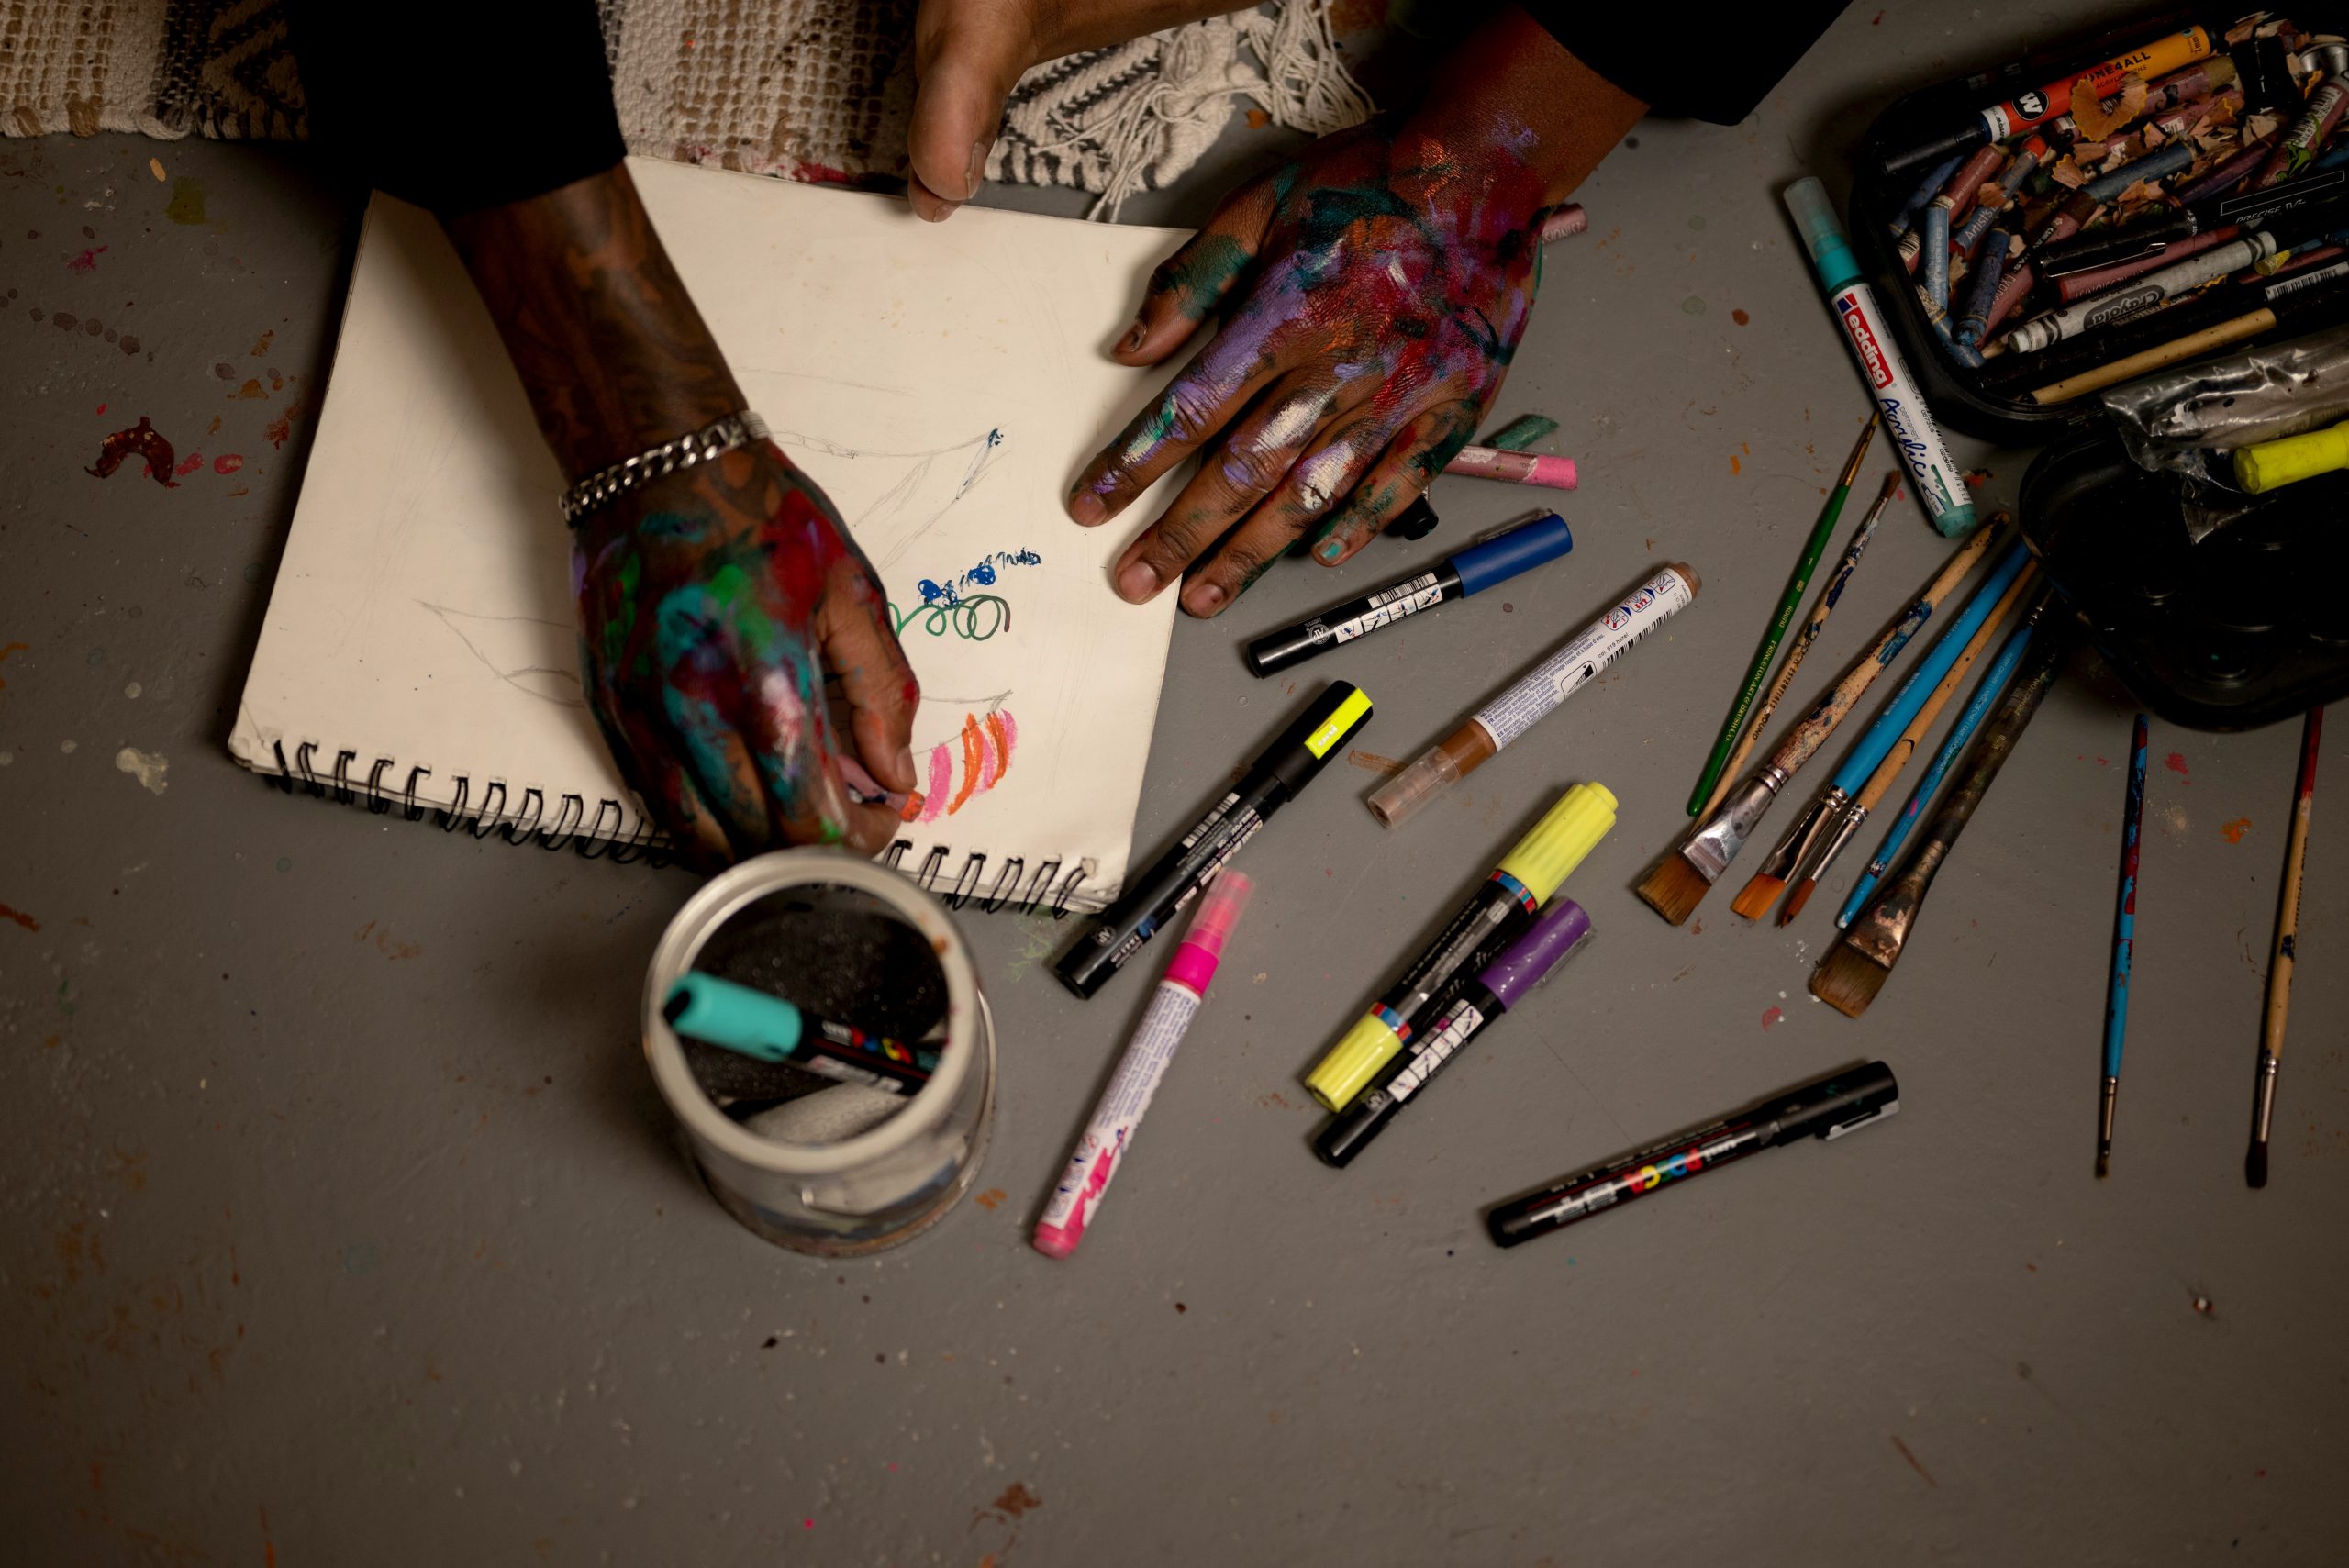 Image: top down view of a floor. Art supplies, markers, and pens scattered across the table. On a piece of paper, a pair of hands drawing. There are swatches of paint on the hands. Photo by Tonal Simmons.